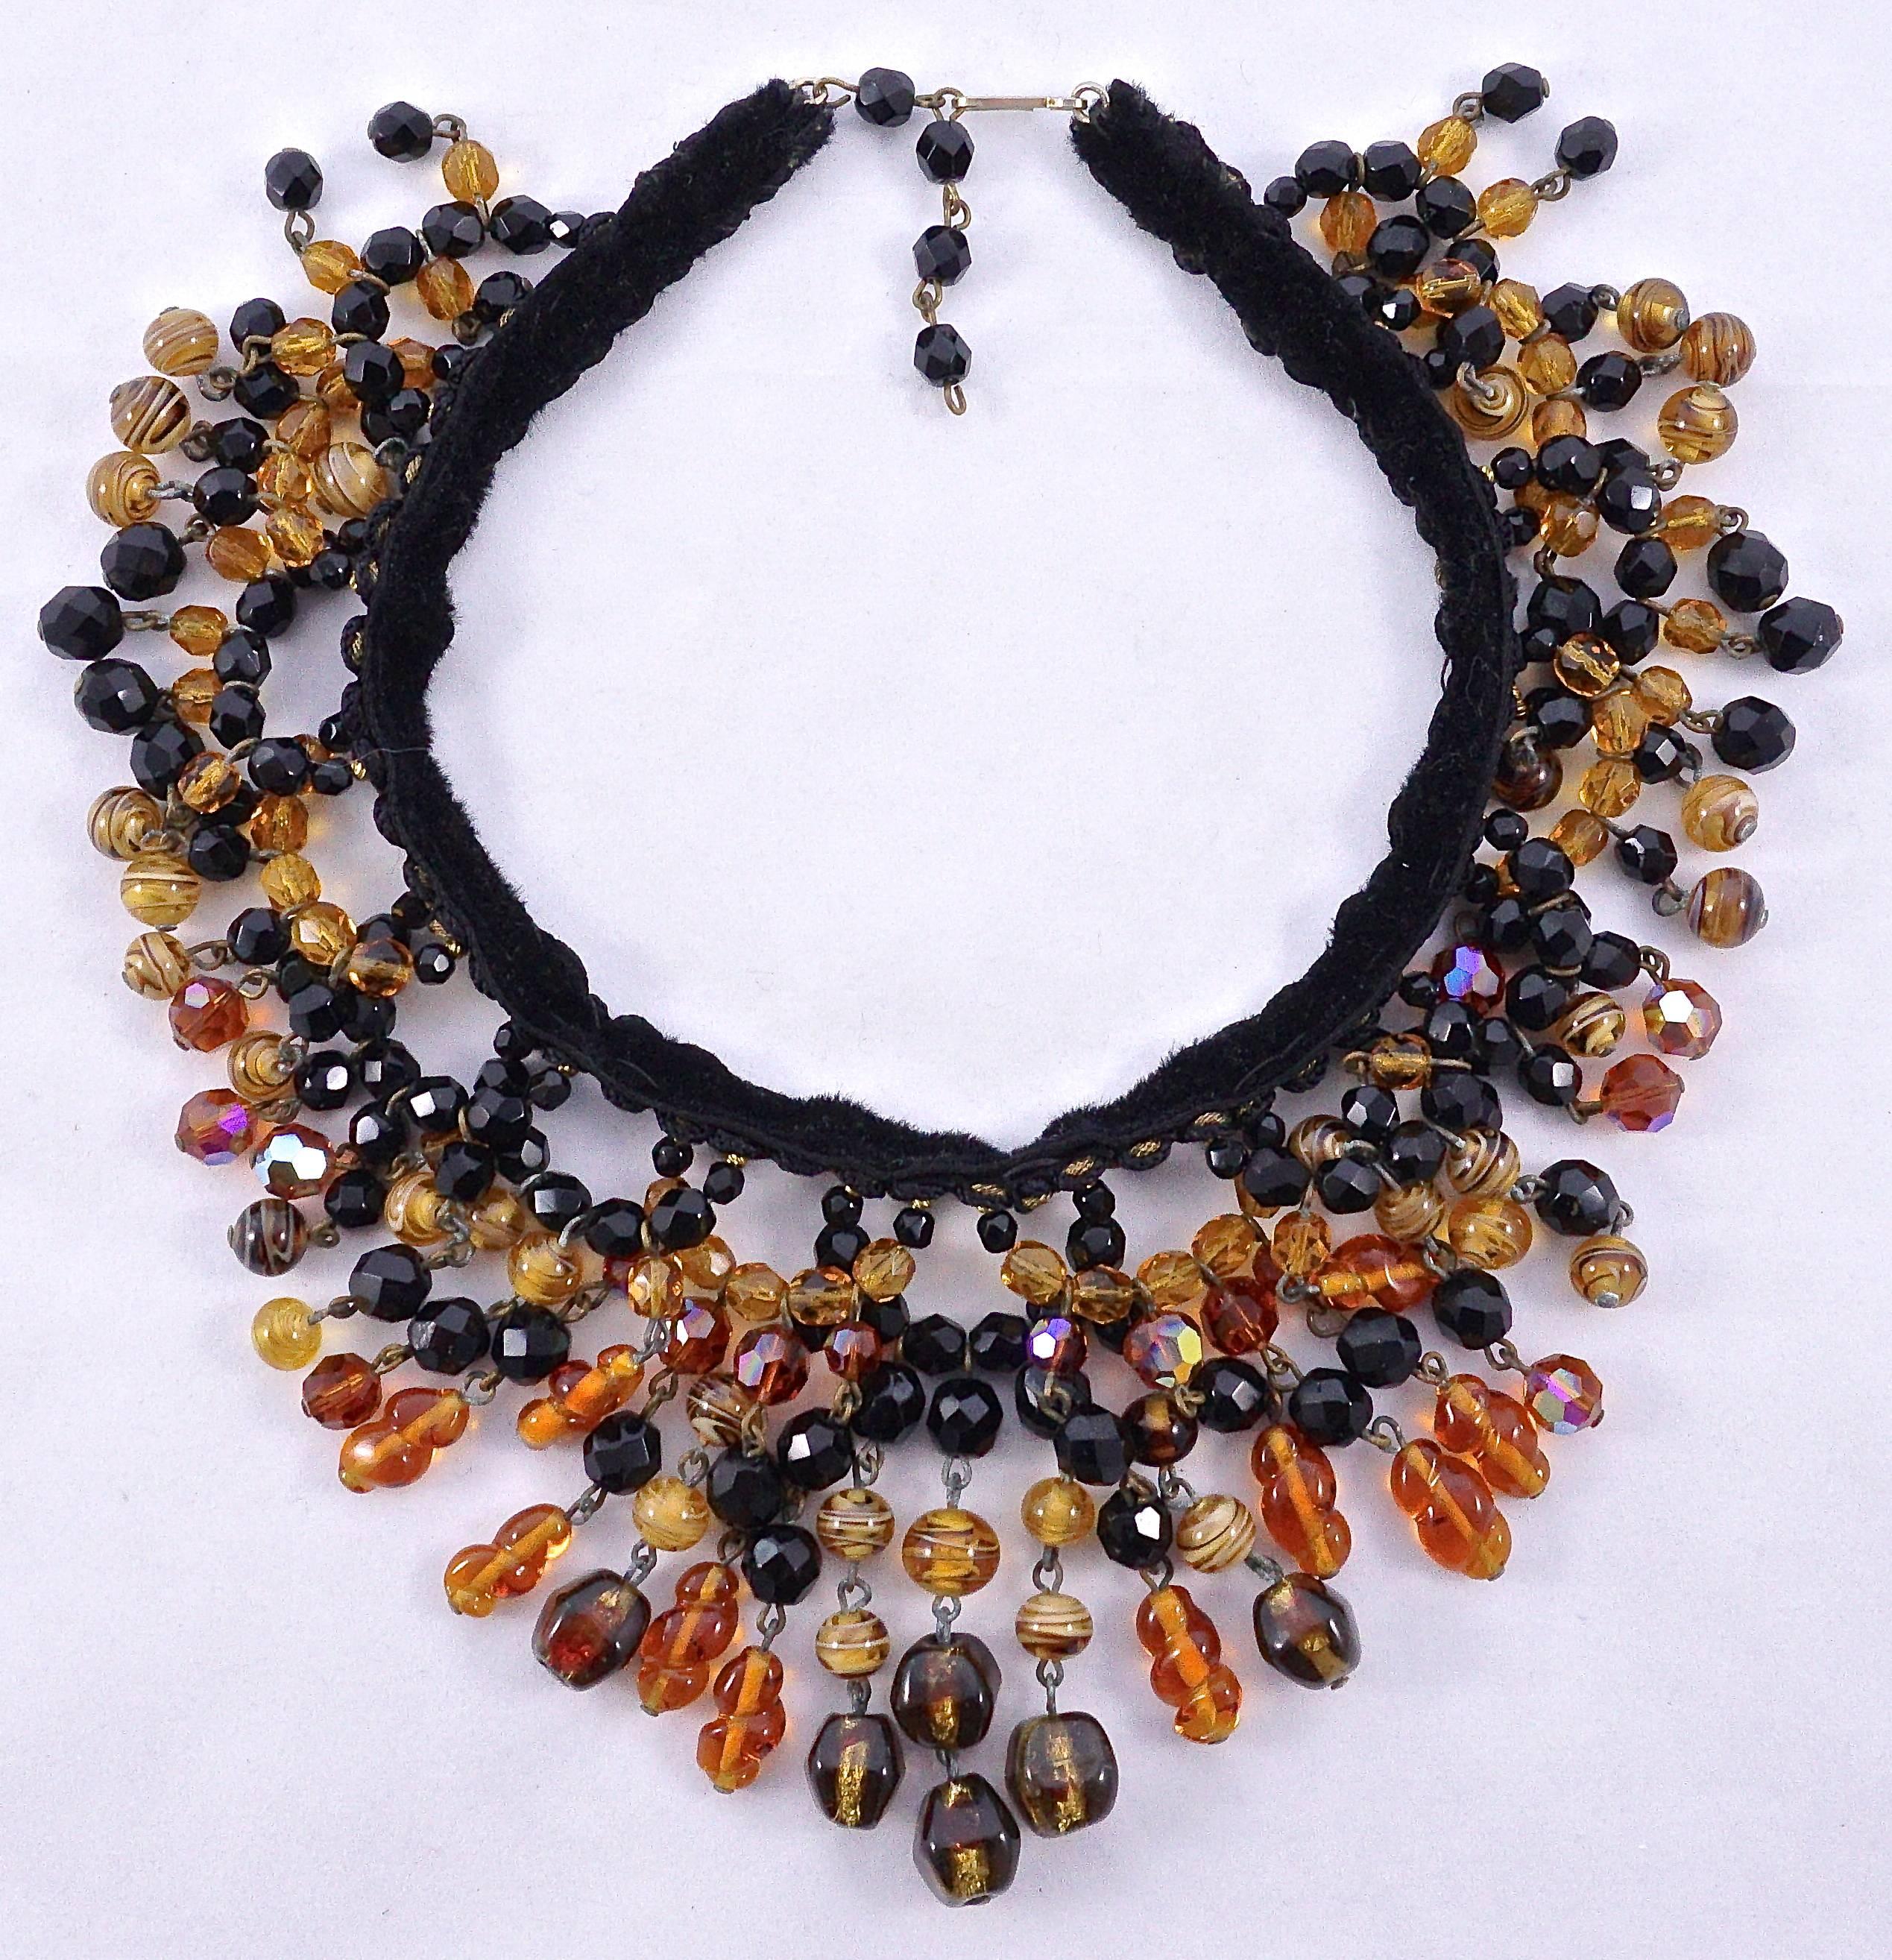 Beautiful hand made glass bead choker necklace. Measuring length 38.5cm / 15.16 inches, and the beads have a maximum drop of 7.3cm / 2.9 inches at the front. The beads are faceted french jet, foiled glass, faceted and smooth amber glass, faceted